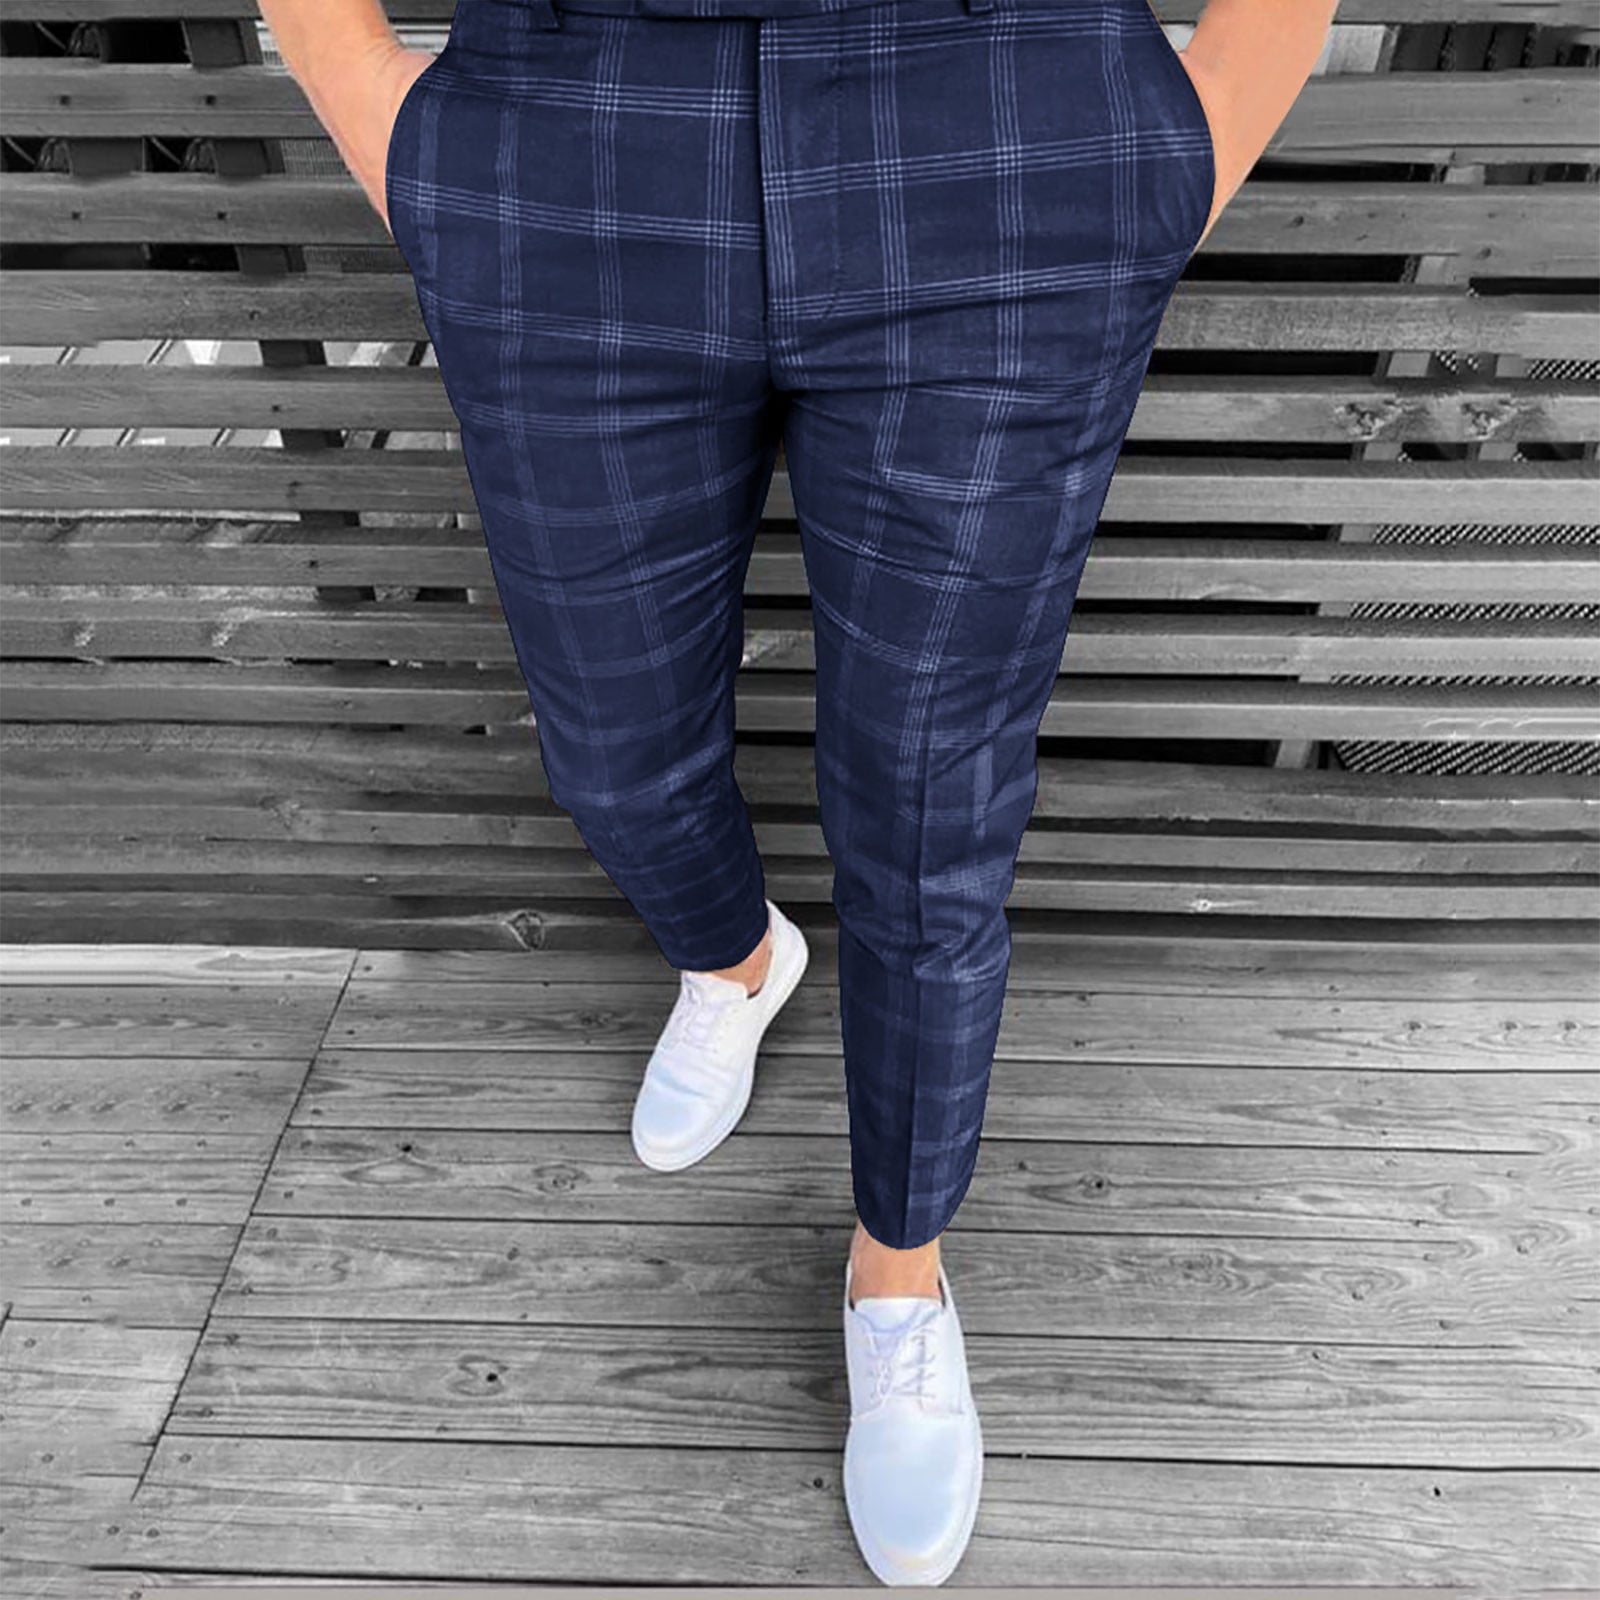 Men's Checkered Pants Outfits – How to Wear and When | Berle-hanic.com.vn